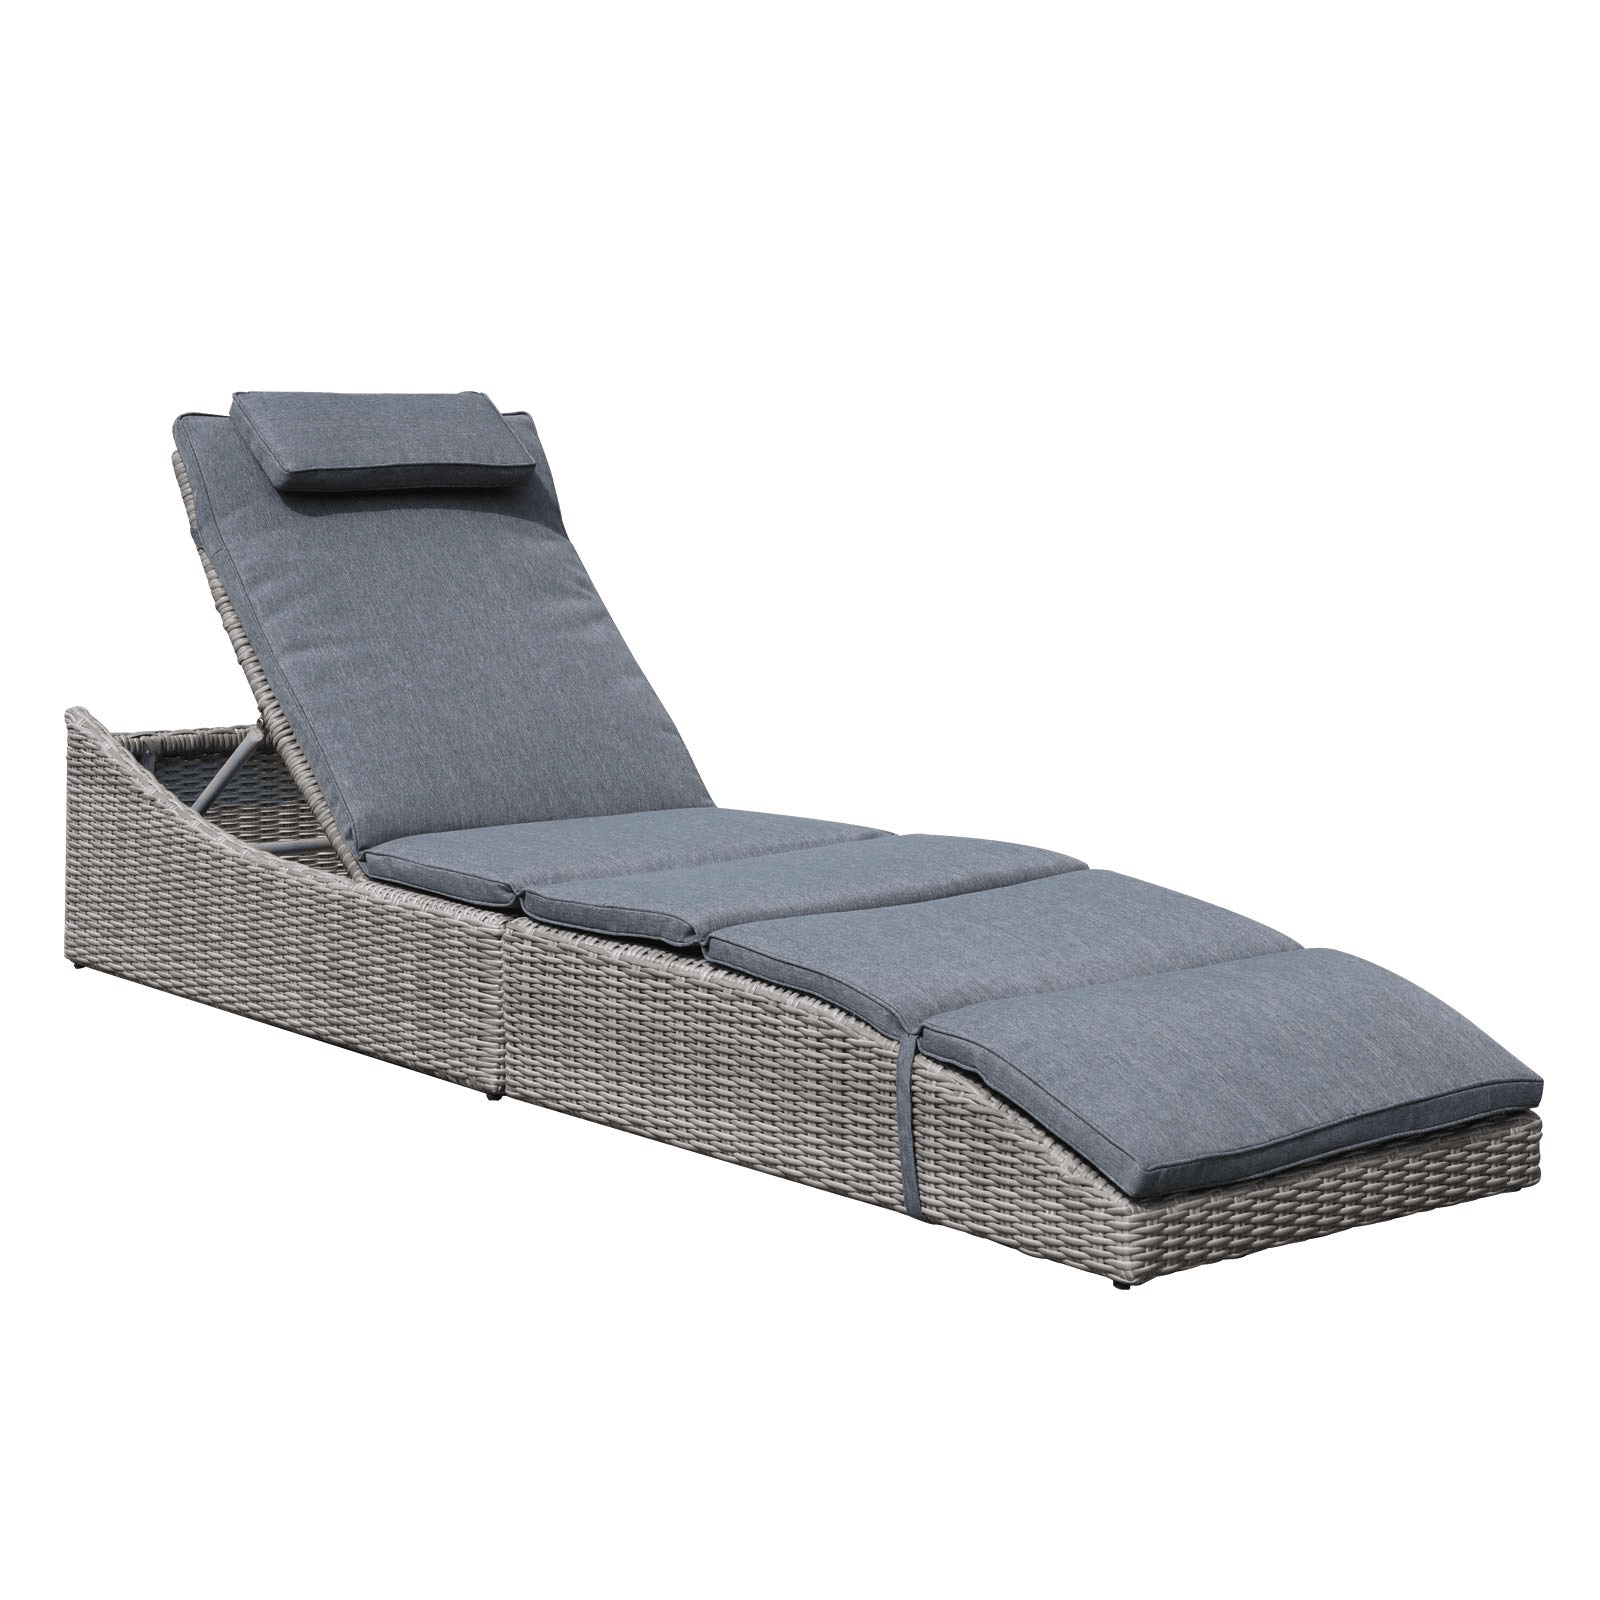 Perth Folding Chaise Lounge with Dark Grey Cushion, Fully Assembled best sale- OrangeCasual